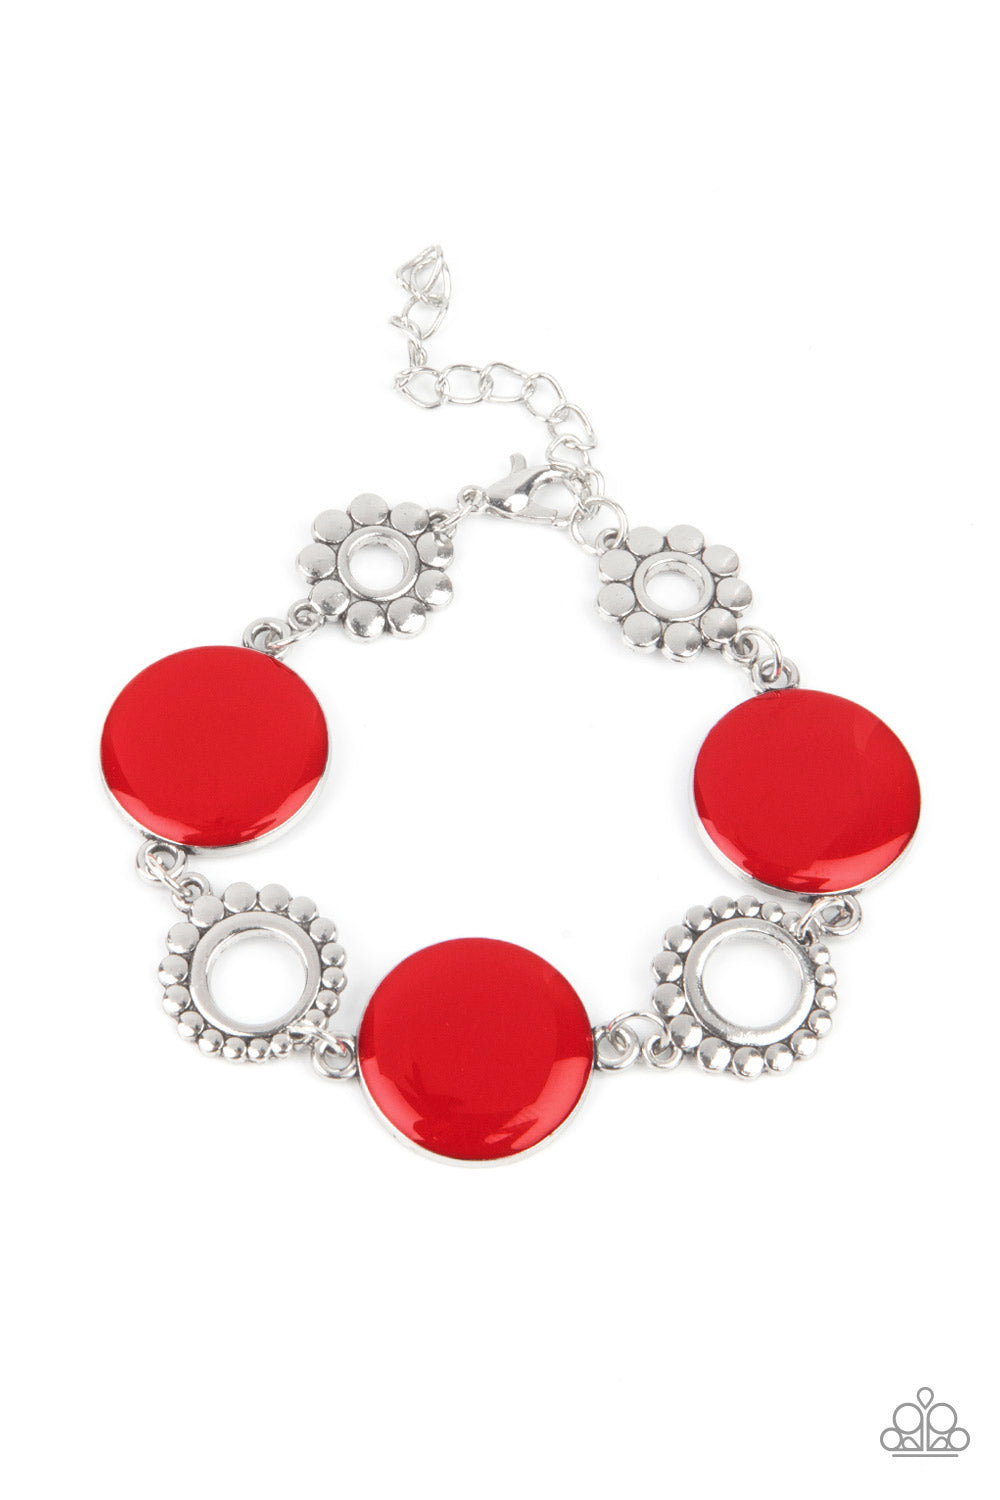 Garden Regalia Red Bracelet - Paparazzi Accessories  Featuring shiny red accents, studded silver circles and shimmery silver floral accents link around the wrist for a colorful display. Features an adjustable clasp closure.  All Paparazzi Accessories are lead free and nickel free!  Sold as one individual bracelet.